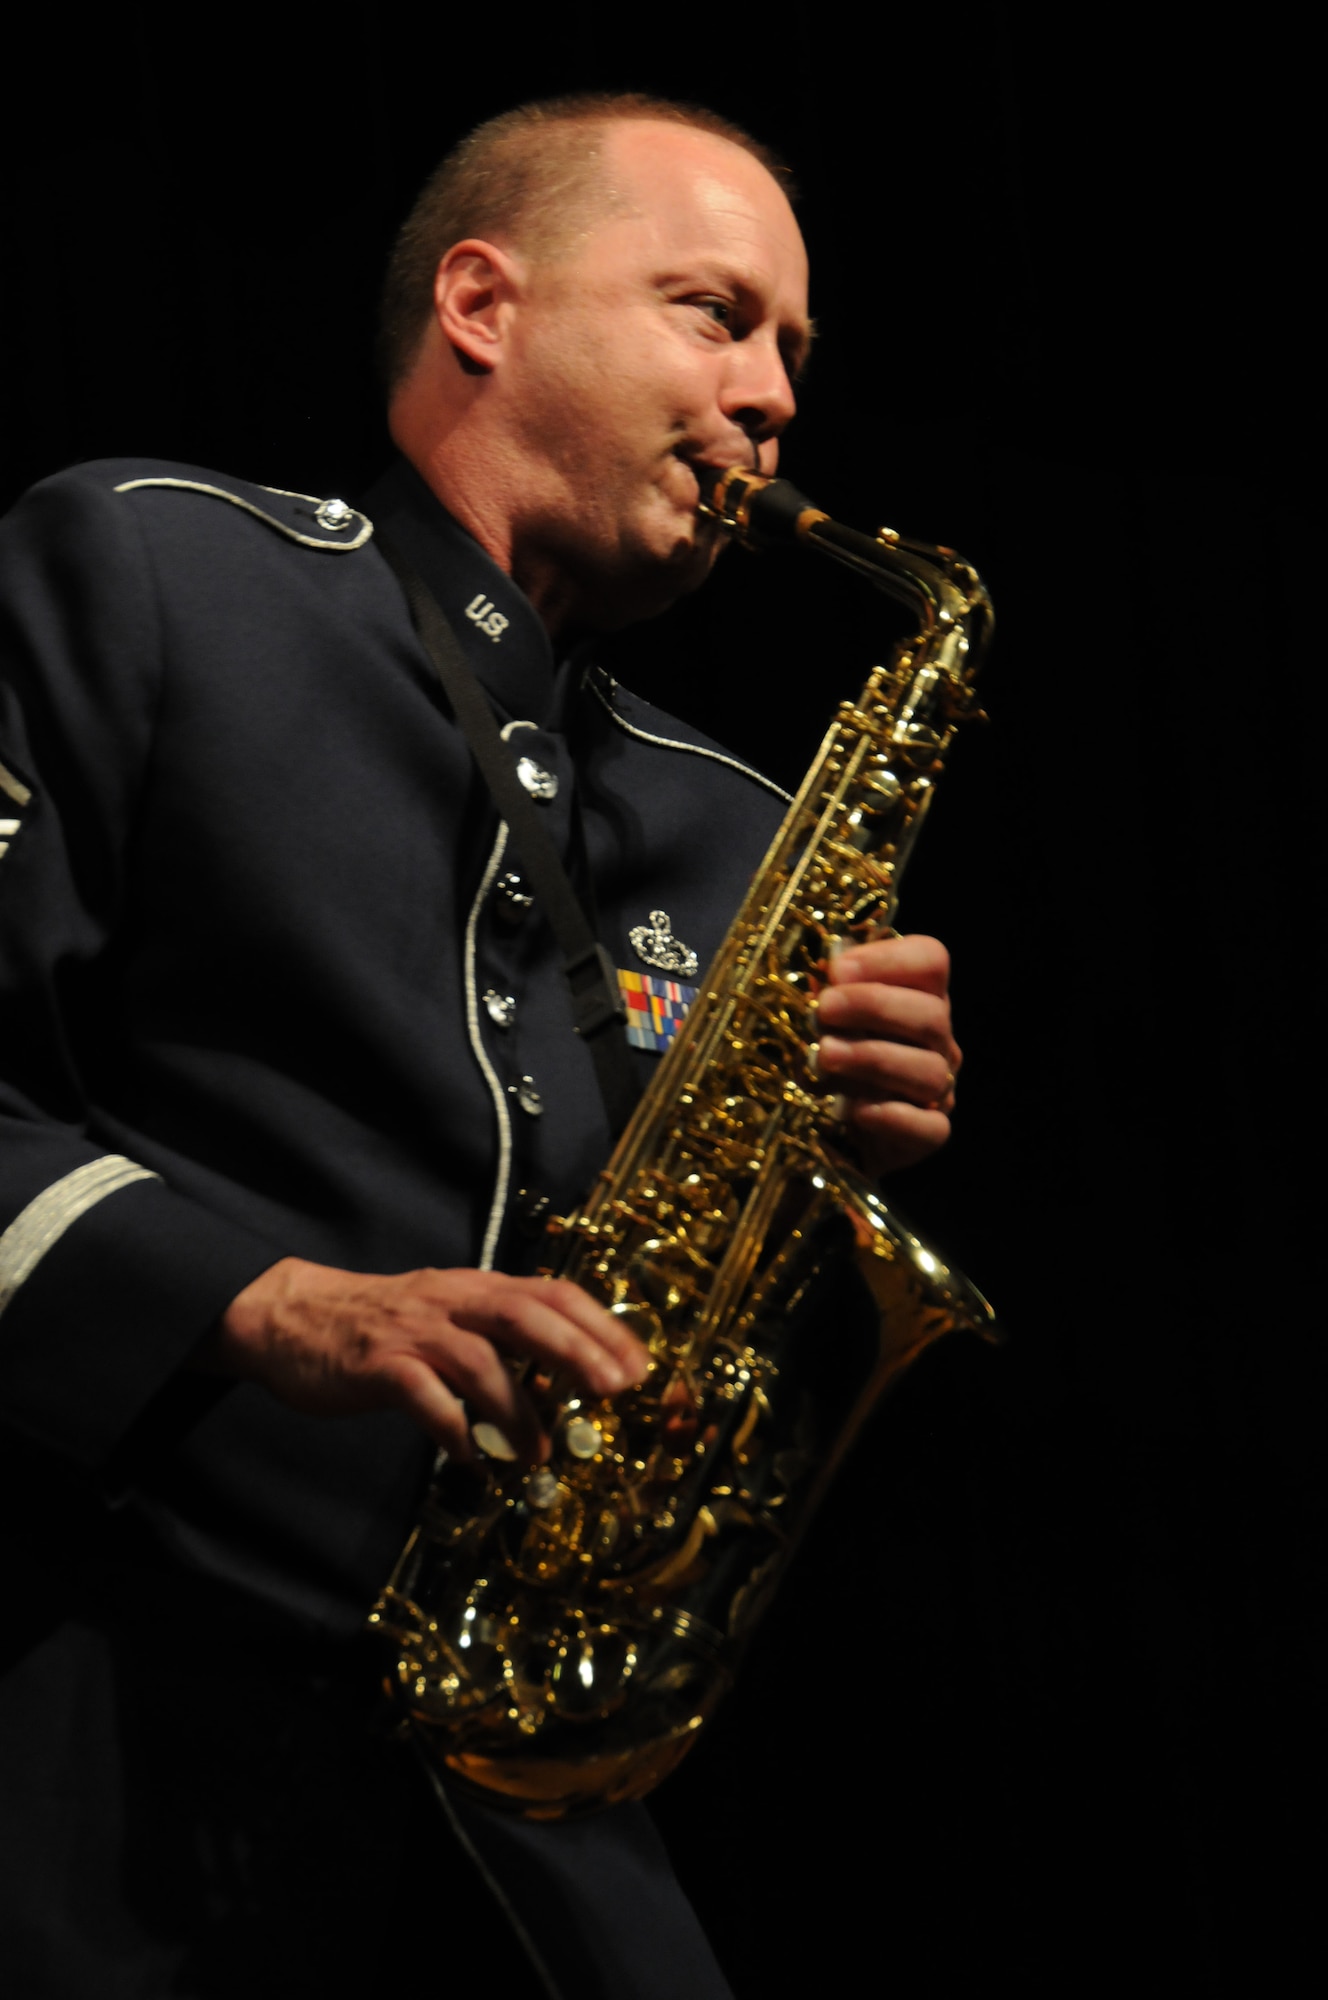 Master Sgt. Stanley George a saxophonist with the 555th Air Force Band performs a solo during the final concert and deactivation ceremony of the 555th Air Force Band, also known as the Triple Nickel and Air National Guard Band of the Great Lakes. The event took place at Anthony Wayne High School, Whitehouse, Ohio, July 7, 2012. The band dating back 1923 will be officially deactivated in 2013 after 90 years of service. (U.S. Air Force photo by Senior Airman Amber Williams/Released)